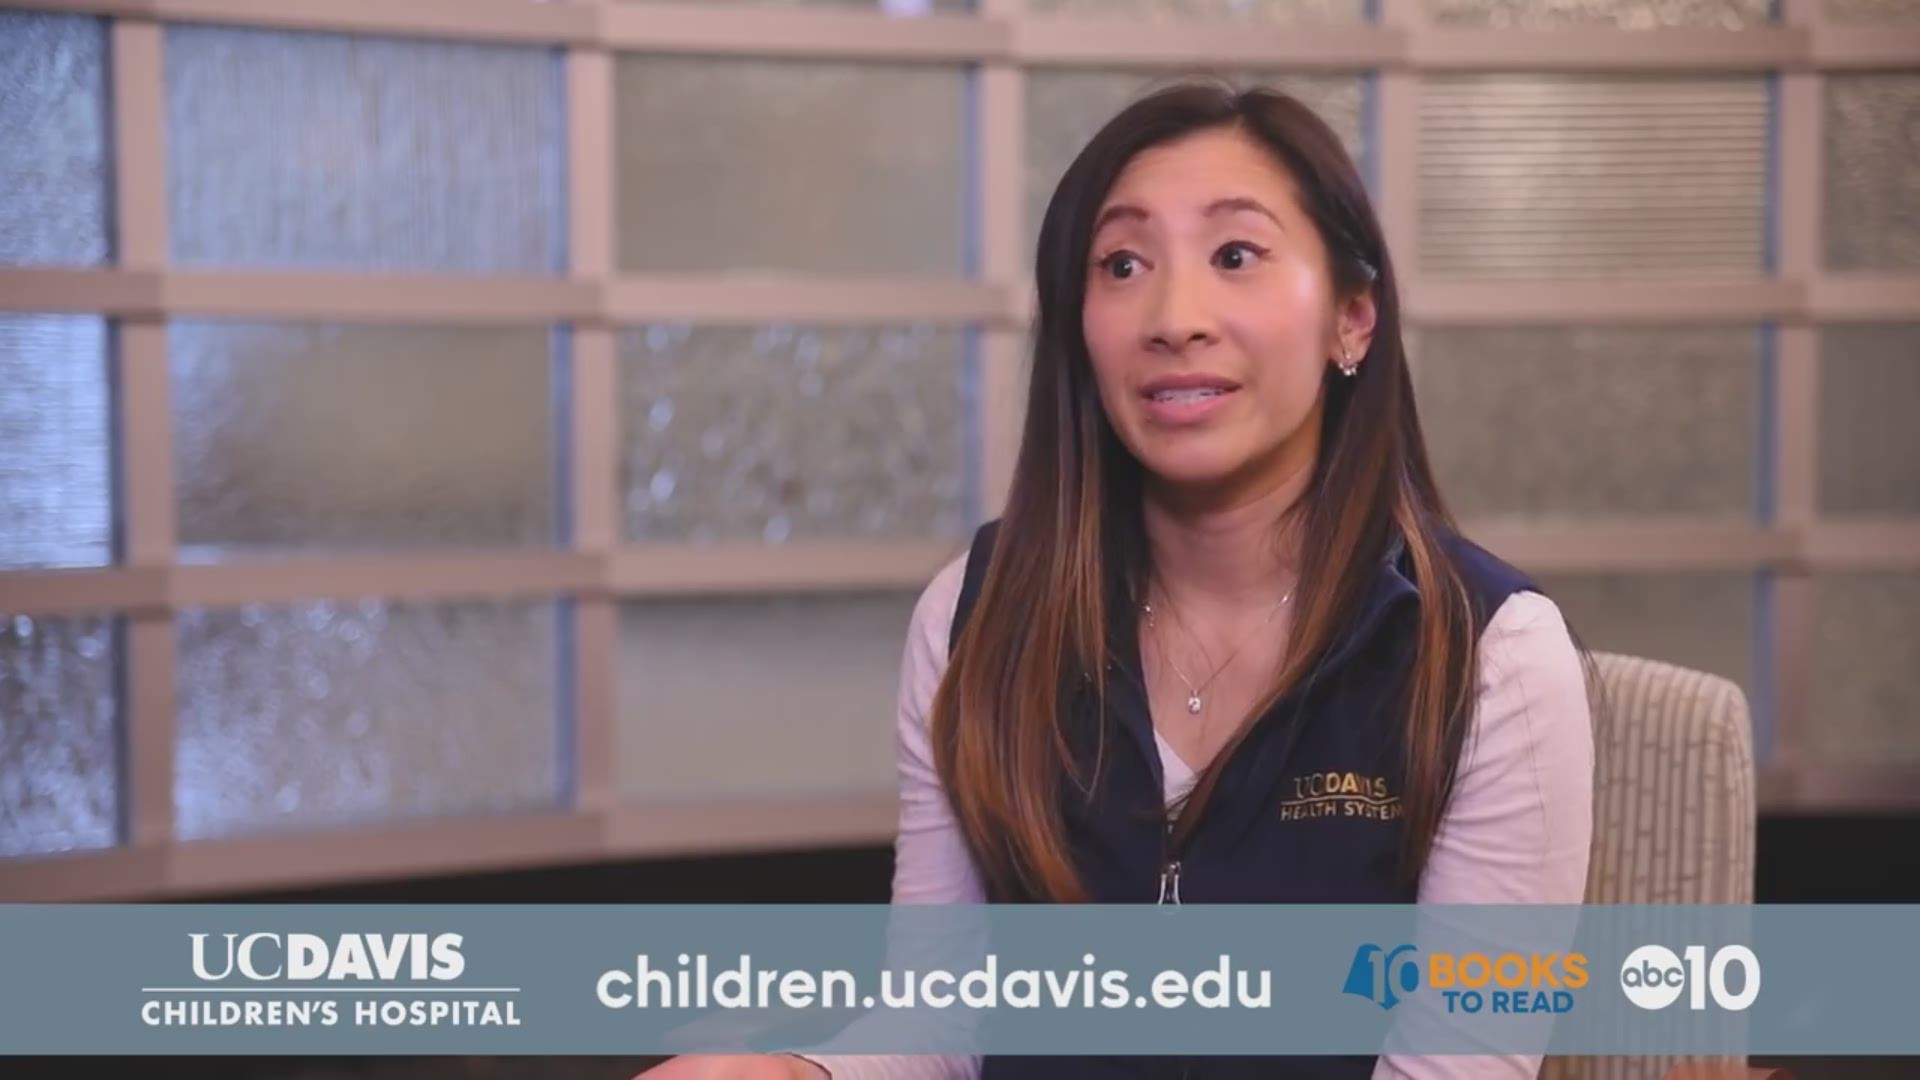 ABC10's 10 Books to Read is Sponsored by UC Davis Children's Hospital.